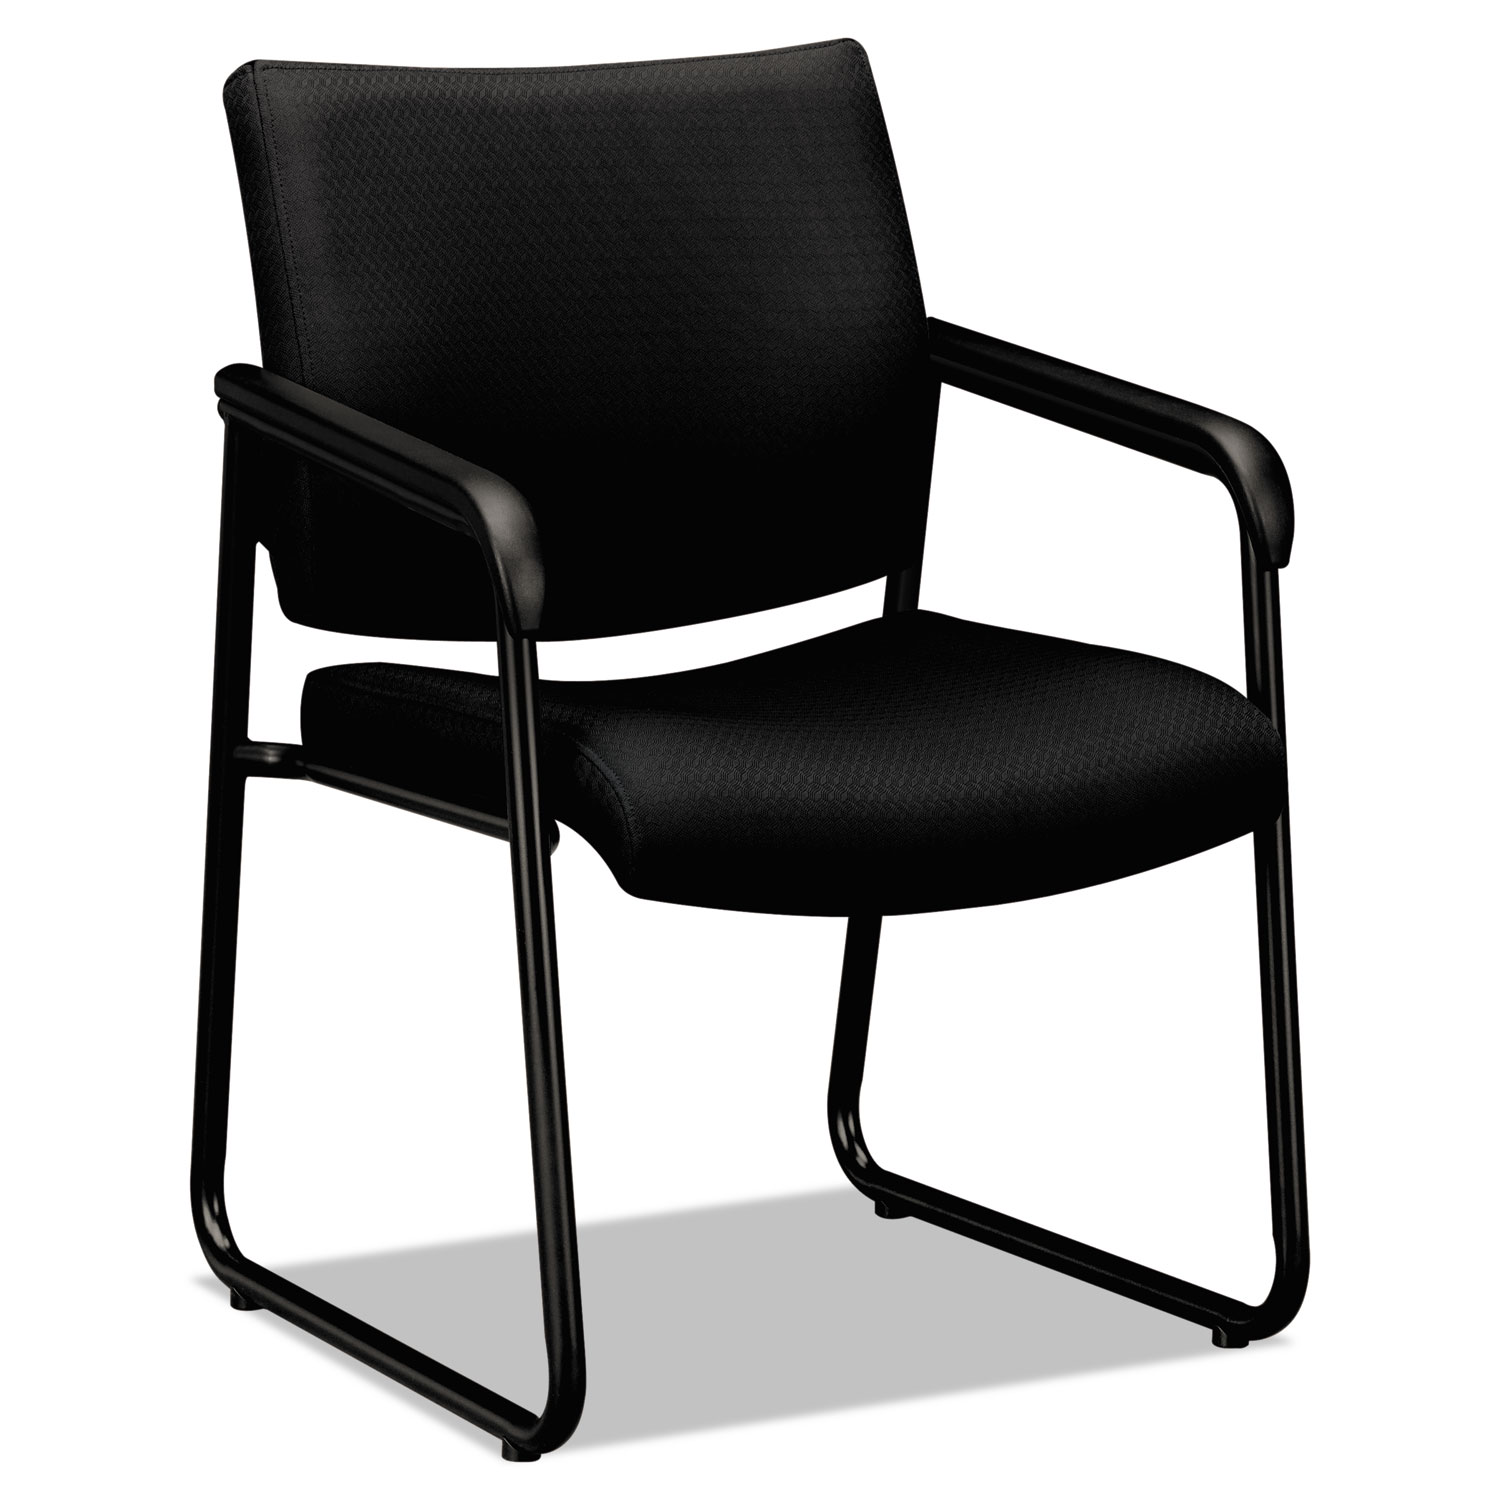 VL443 Series Guest Chair with Black Fabric, Black Frame & Sled Base